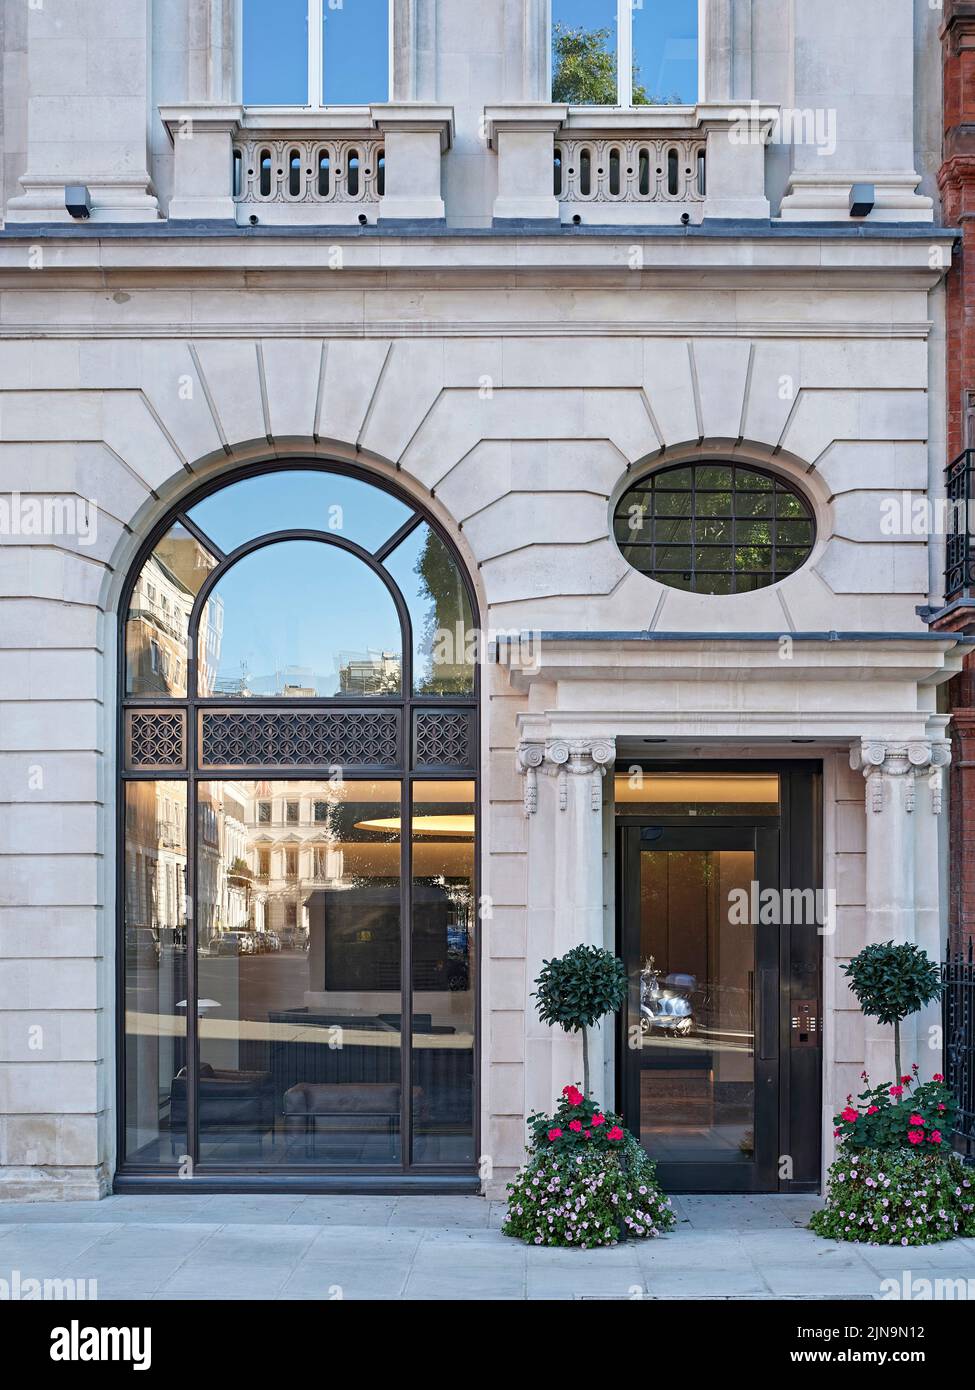 Entrance and street facade on St James' Square. 30 St James' Square, London, United Kingdom. Architect: Eric Parry Architects Ltd, 2021. Stock Photo